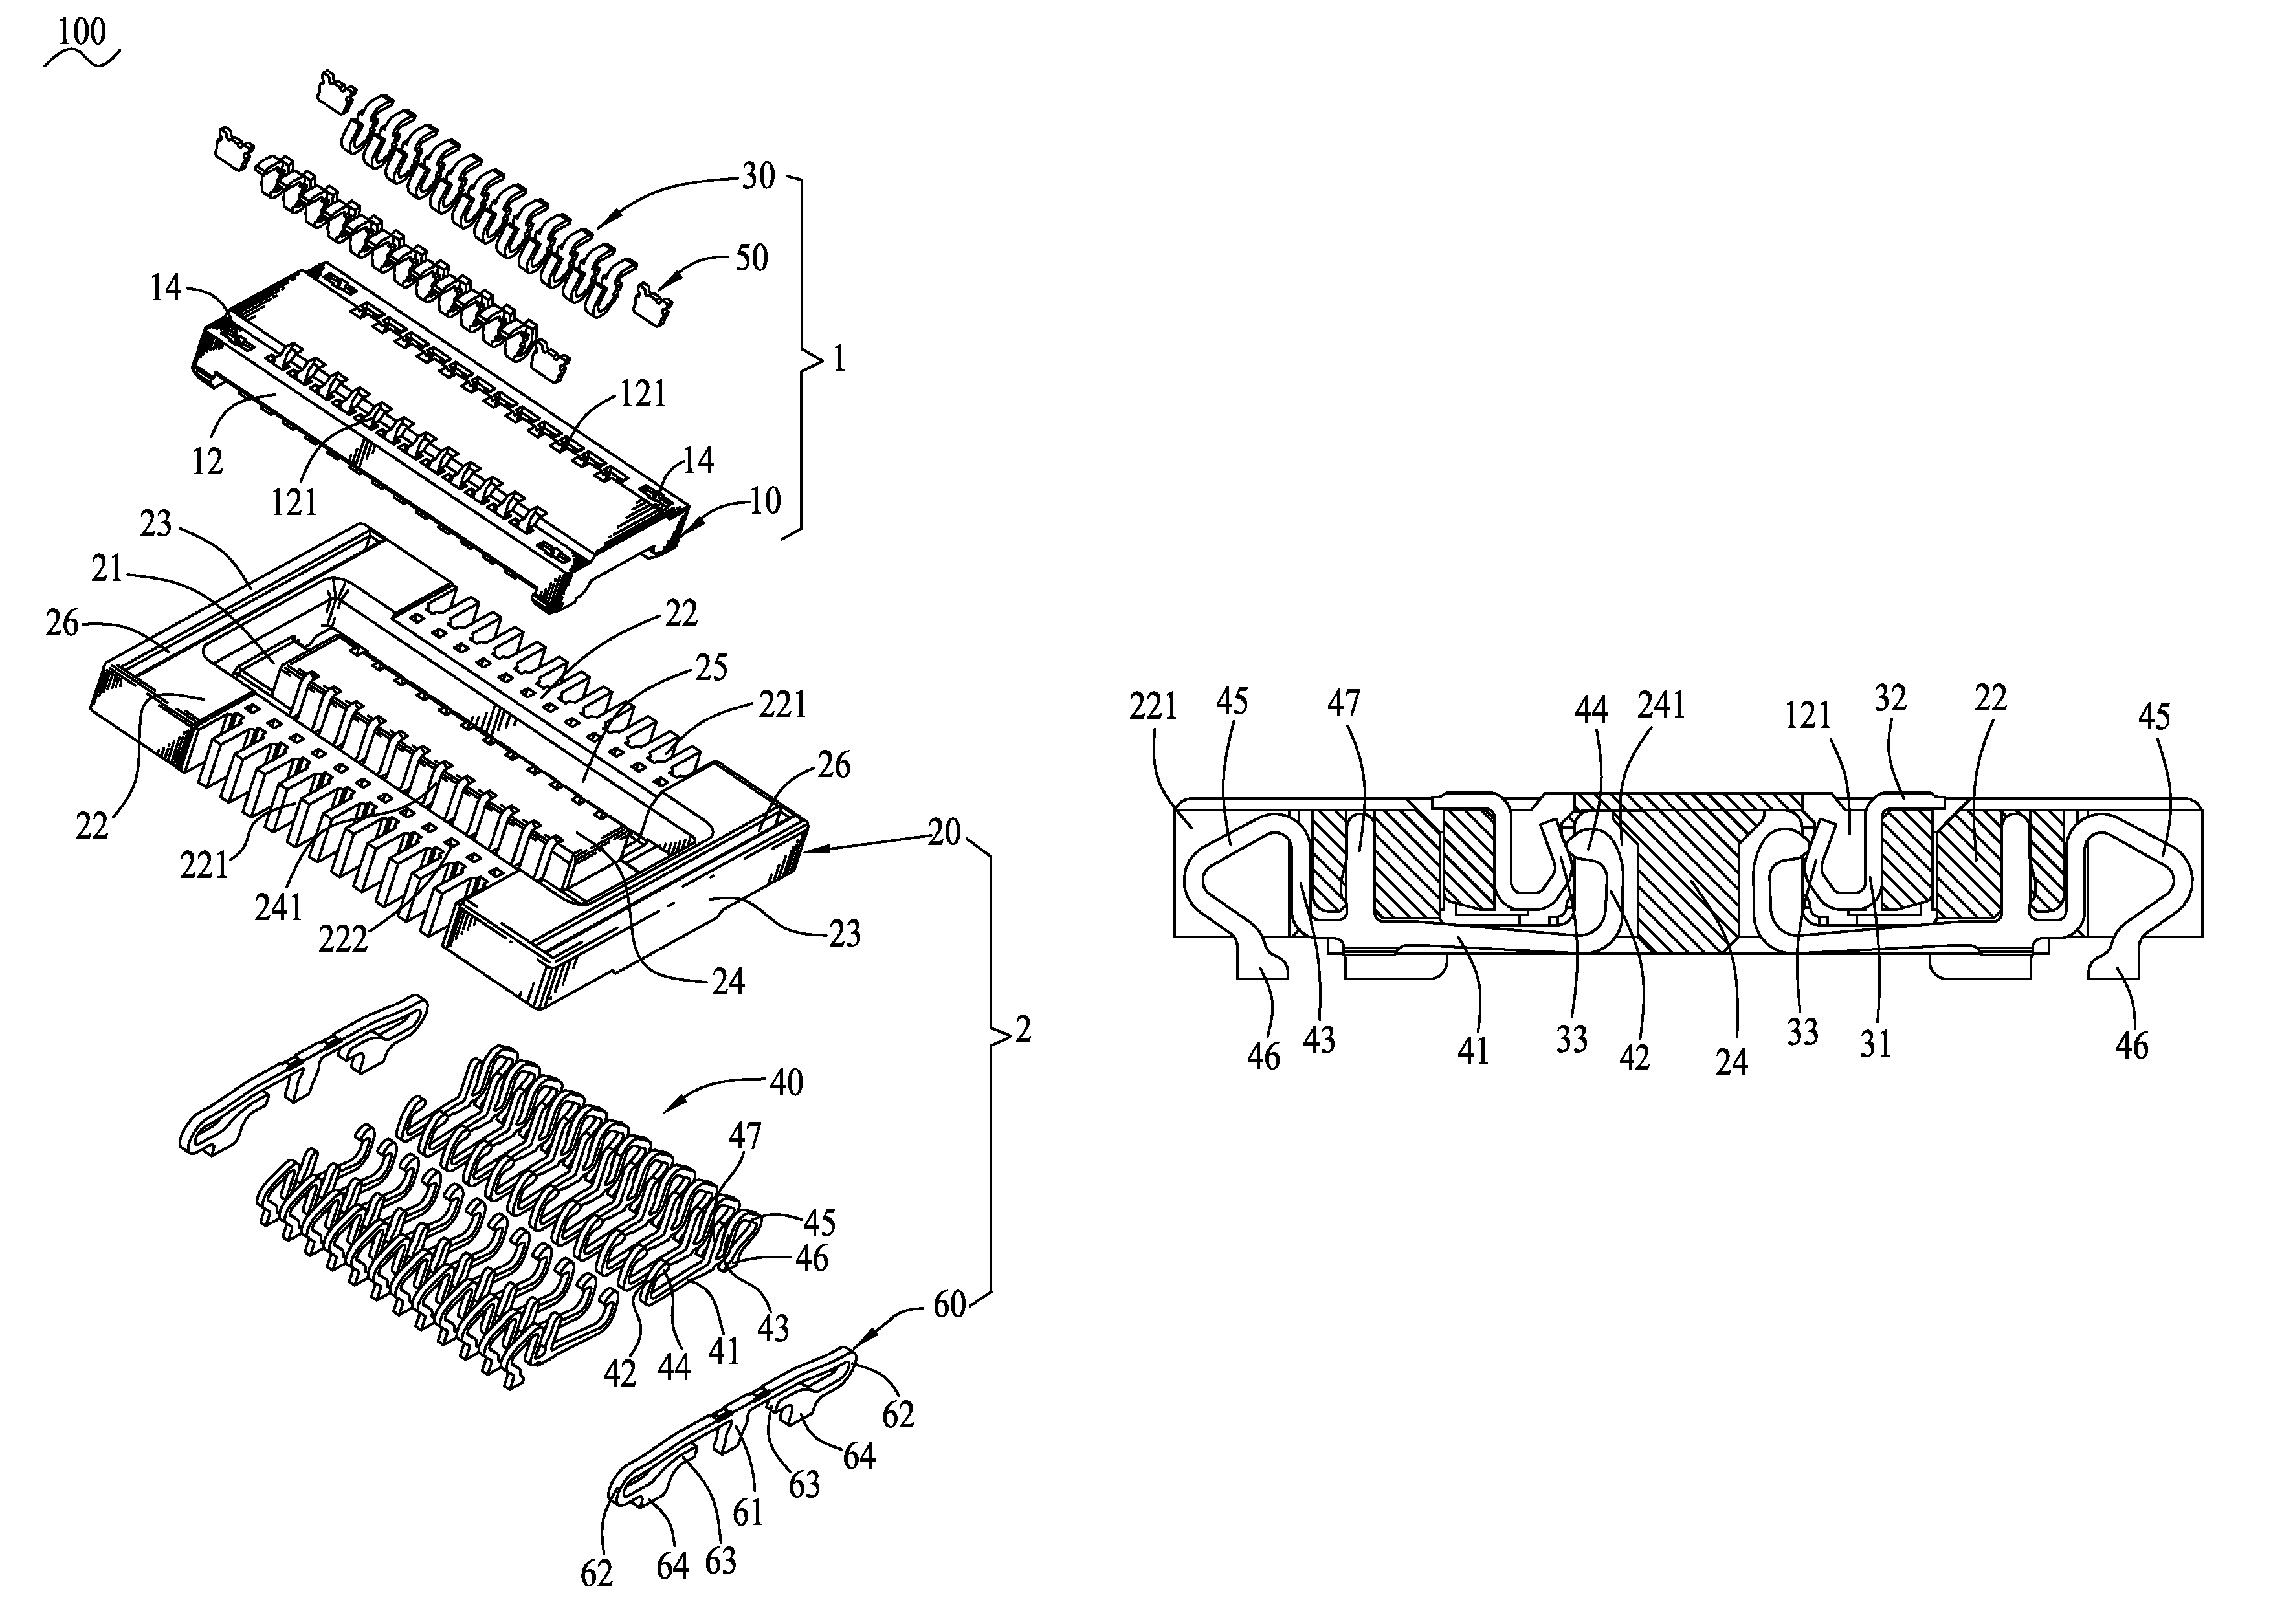 Board-to-board connector assembly